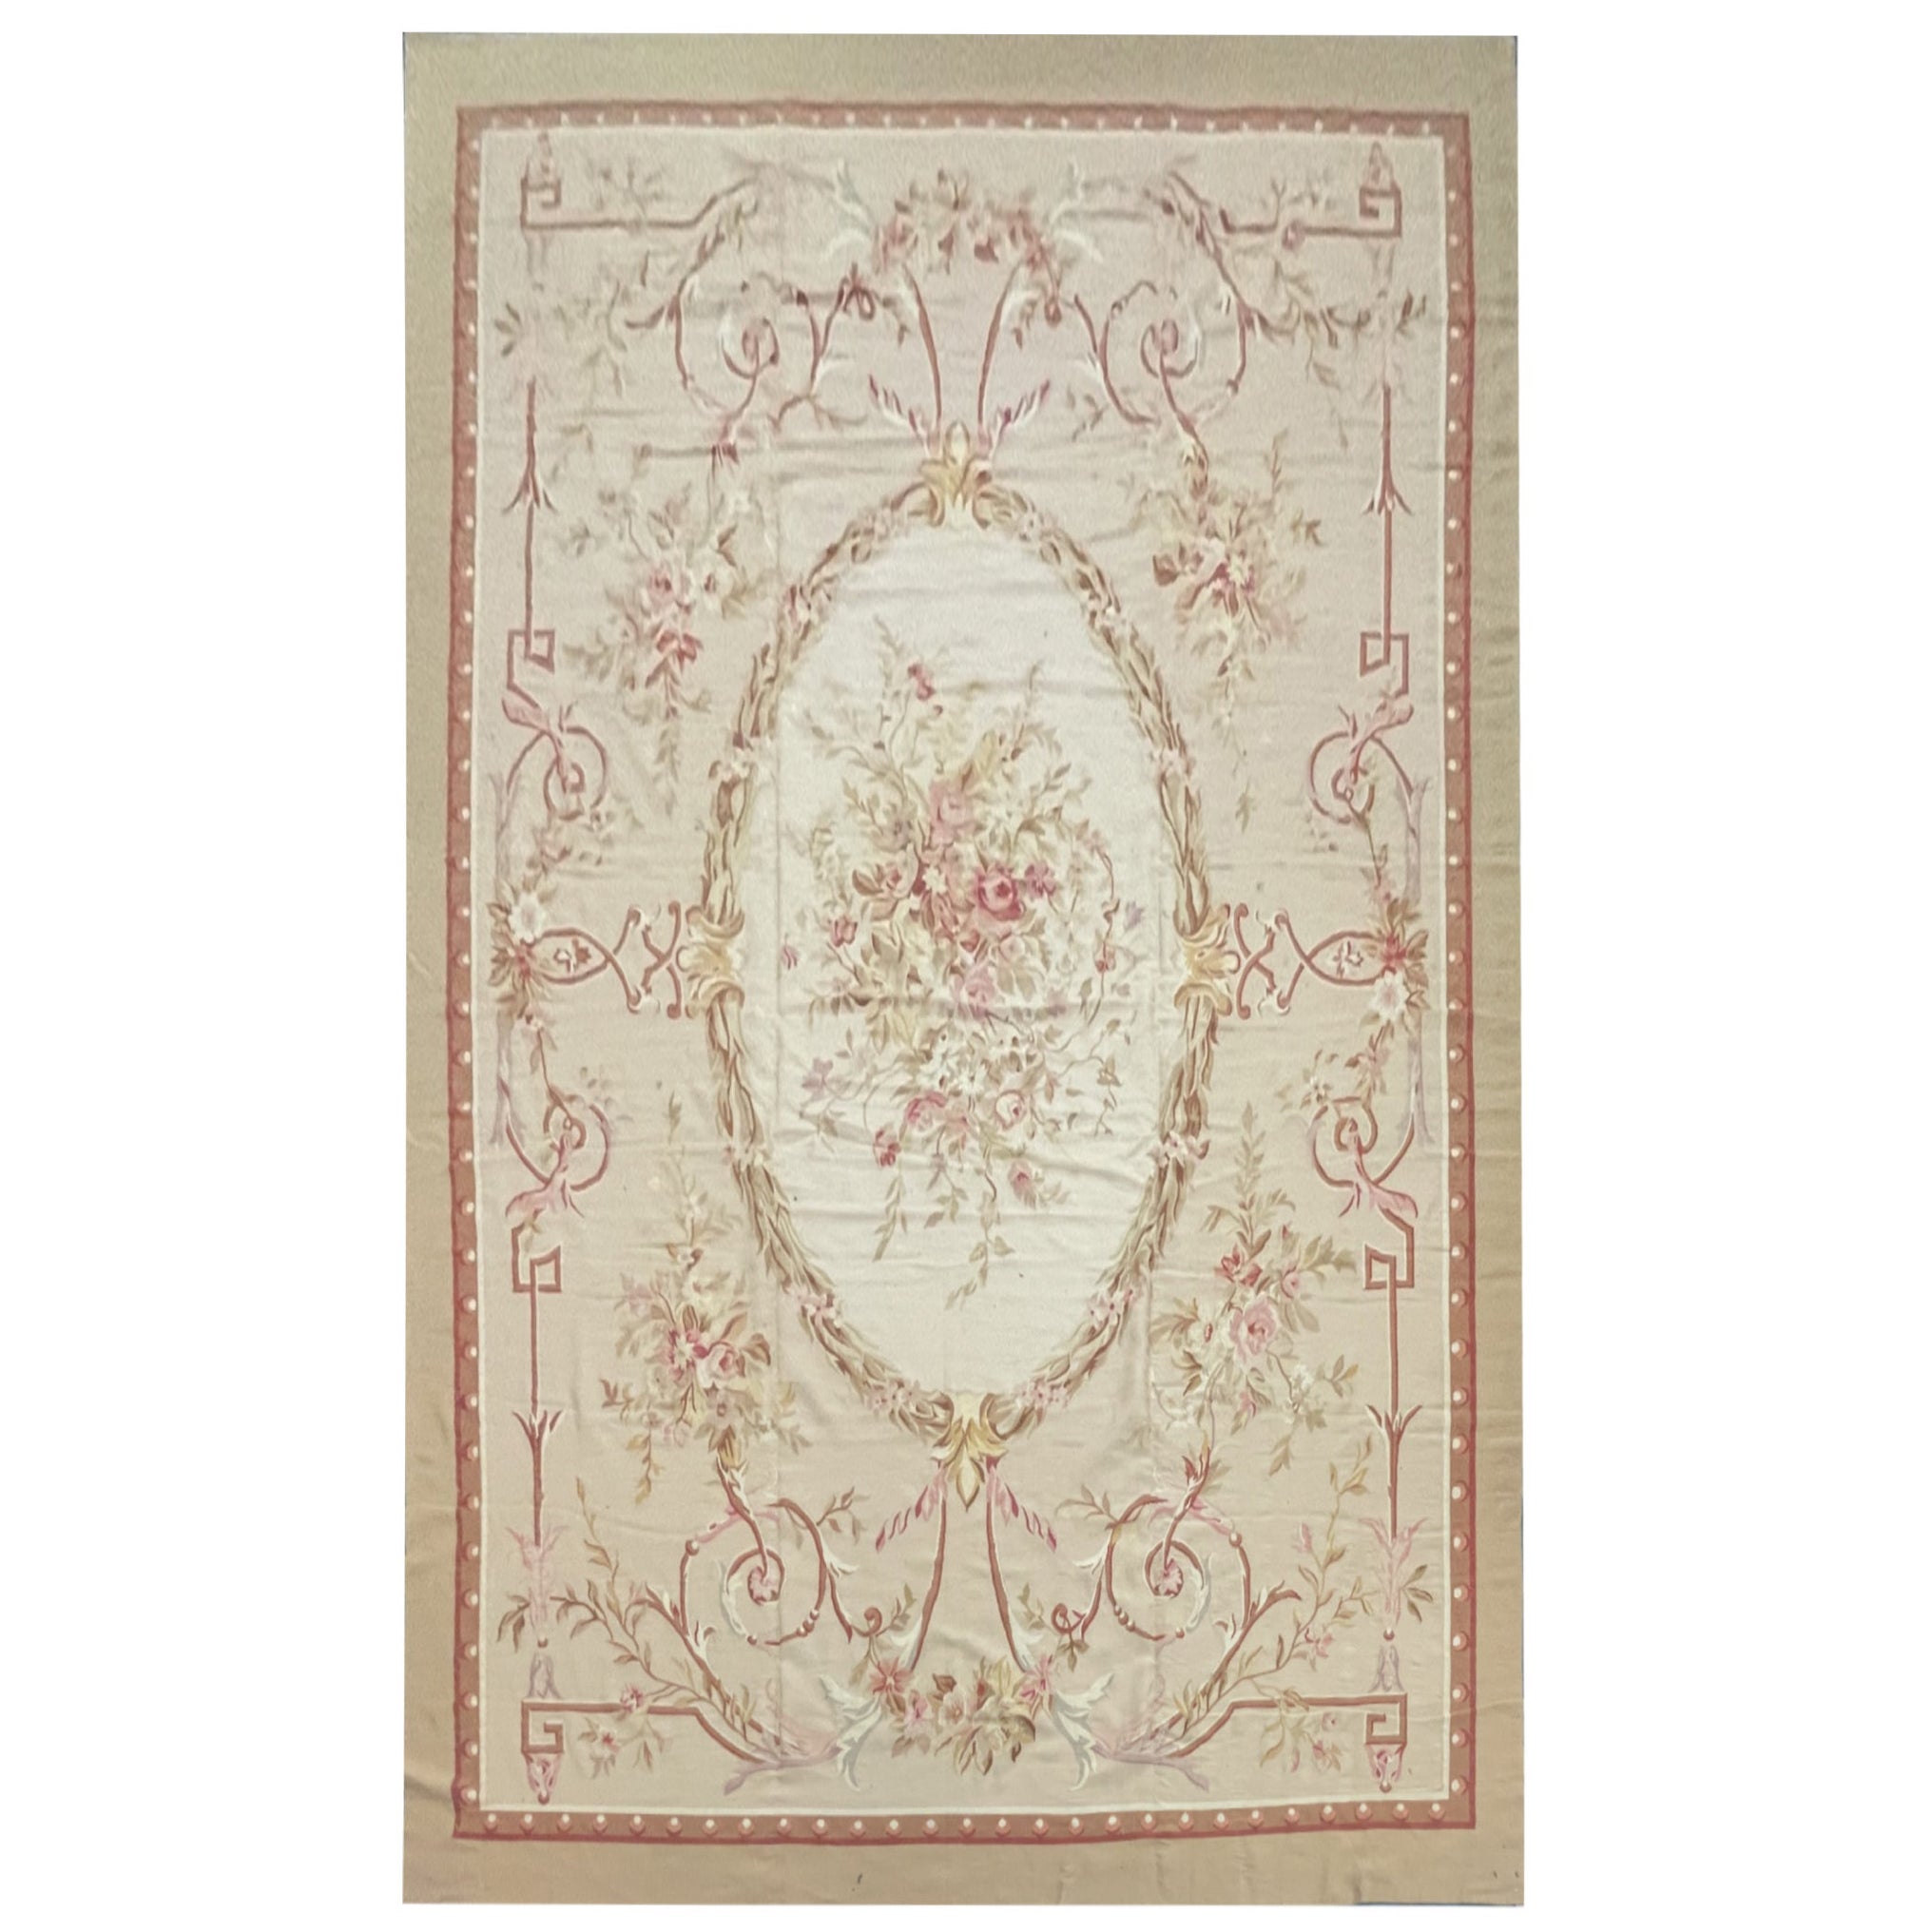 Rococo Aubusson Rug Beige Pink Handwoven Carpet Wool Livingroom Rug Home Decor For Sale